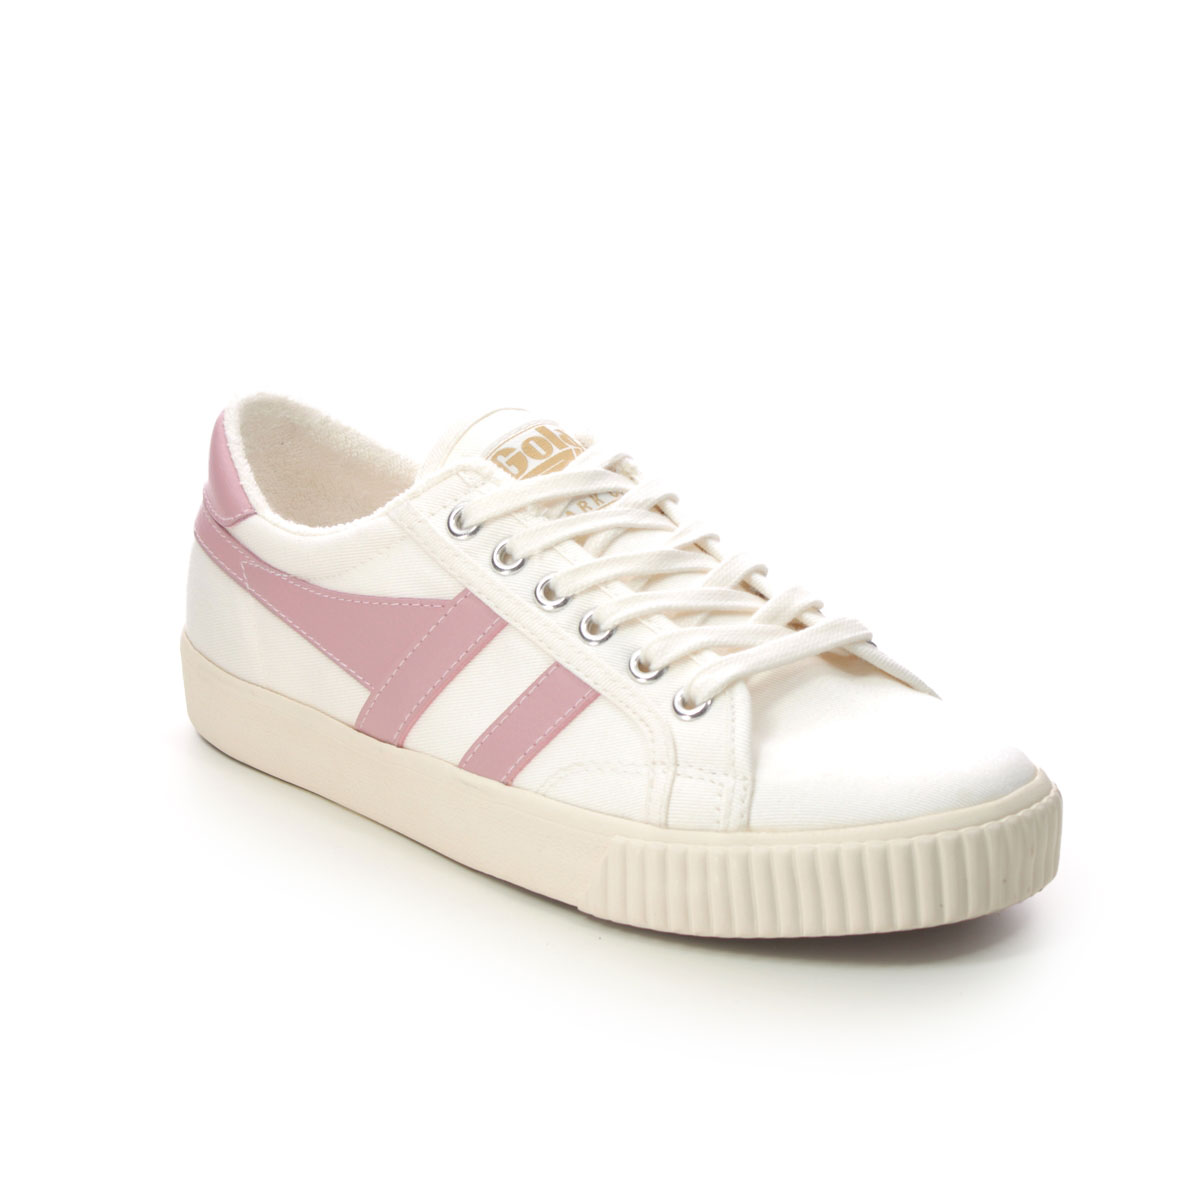 Gola Tennis Mark Cox White Pink Womens trainers CLA280-WK in a Plain Canvas in Size 3